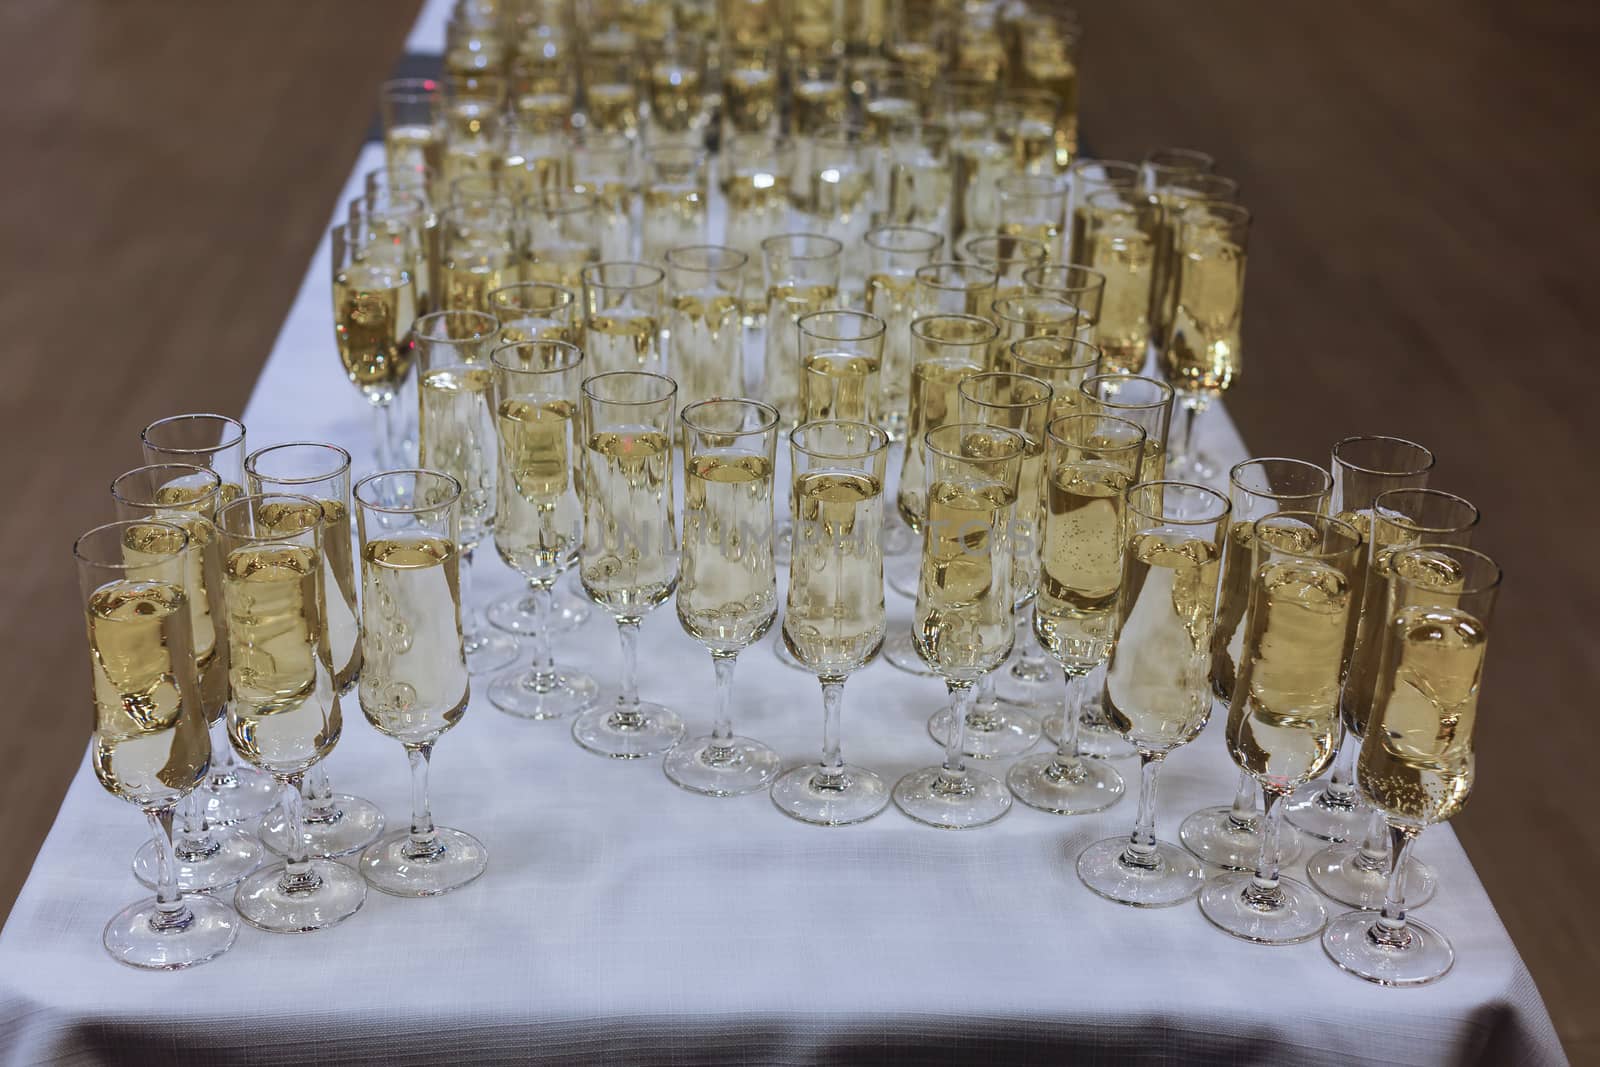 A table with wine glasses. High quality photo